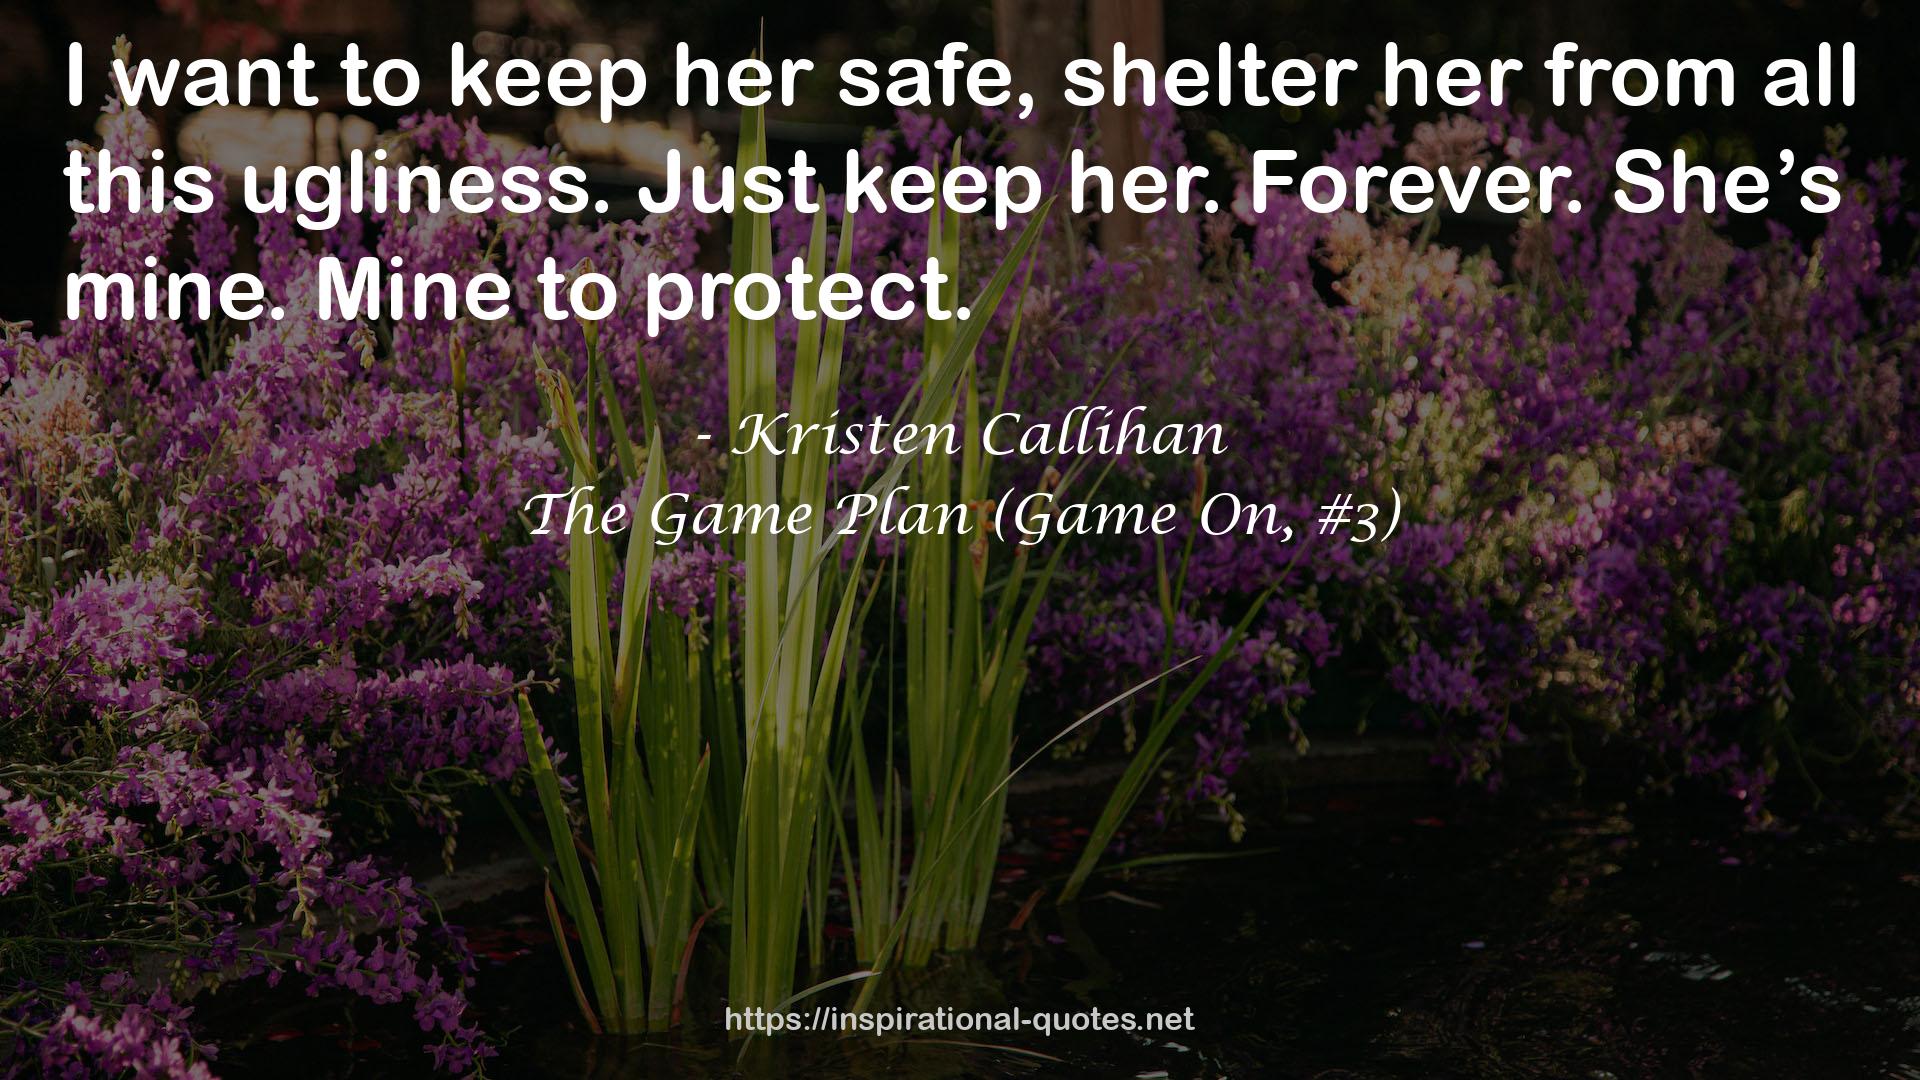 The Game Plan (Game On, #3) QUOTES